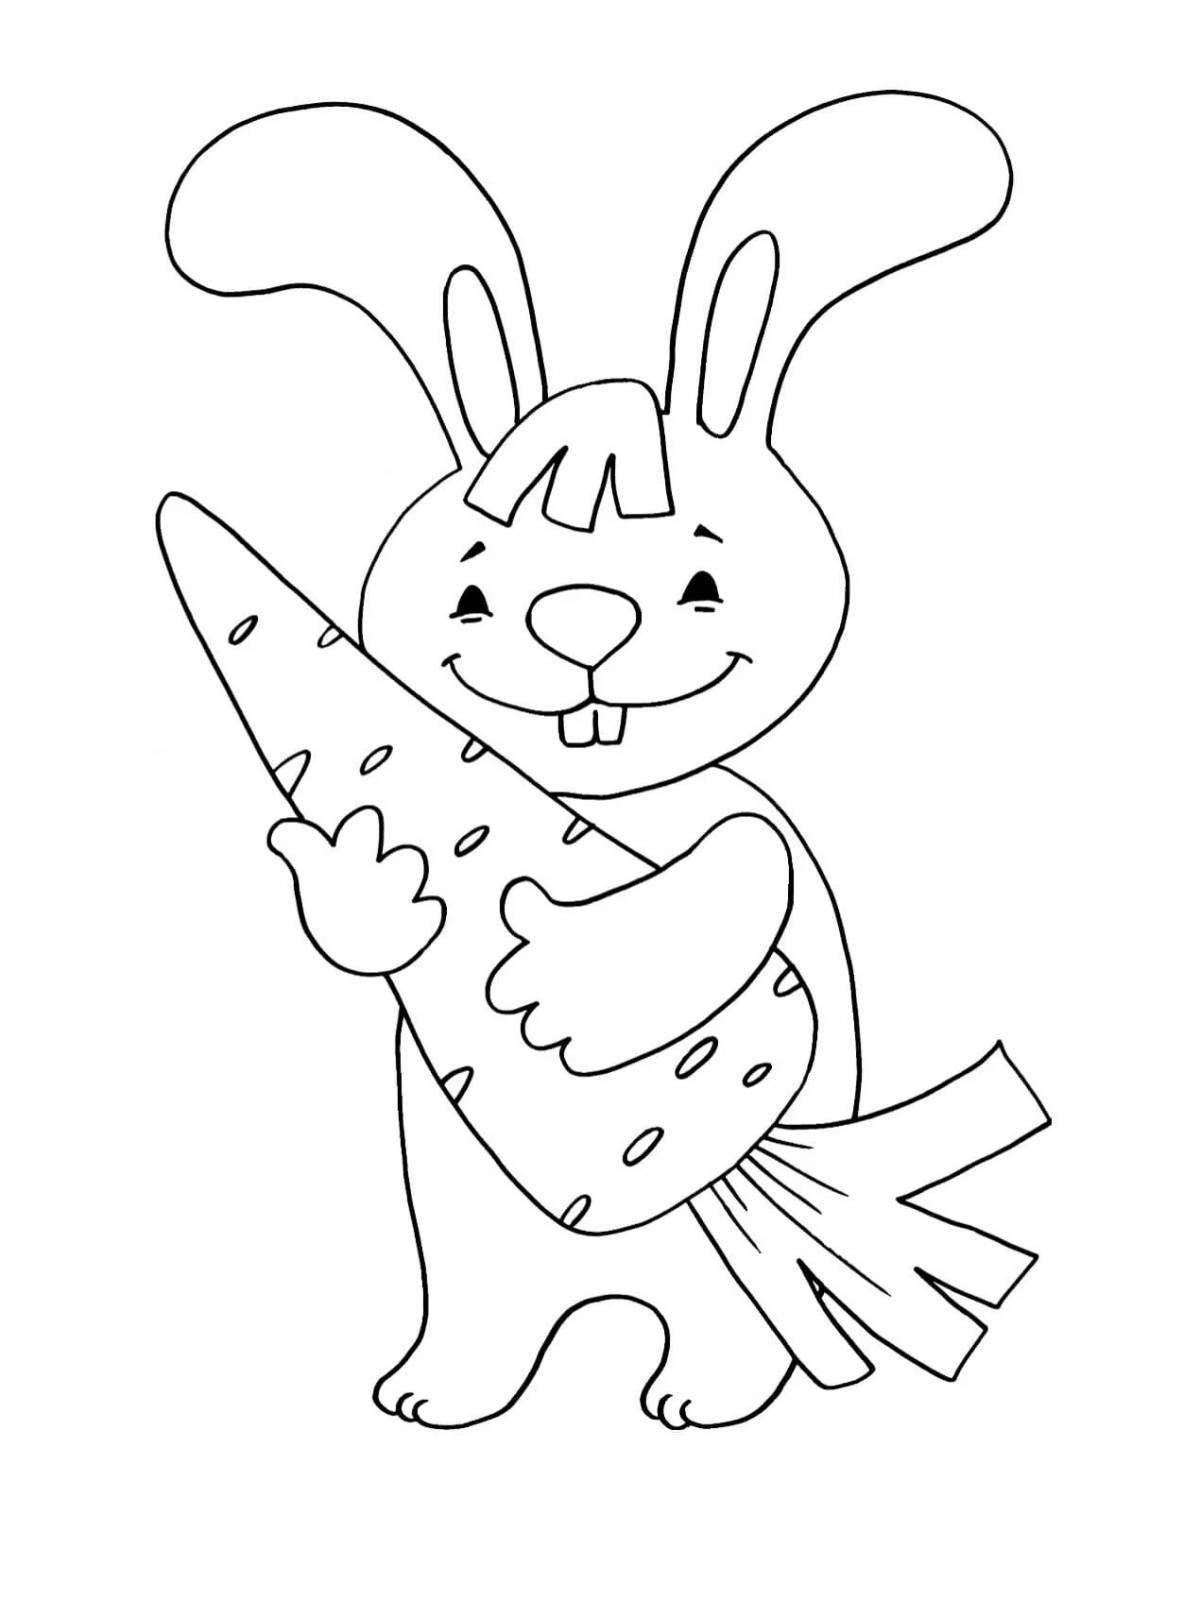 Coloring page bizarre hare with a carrot